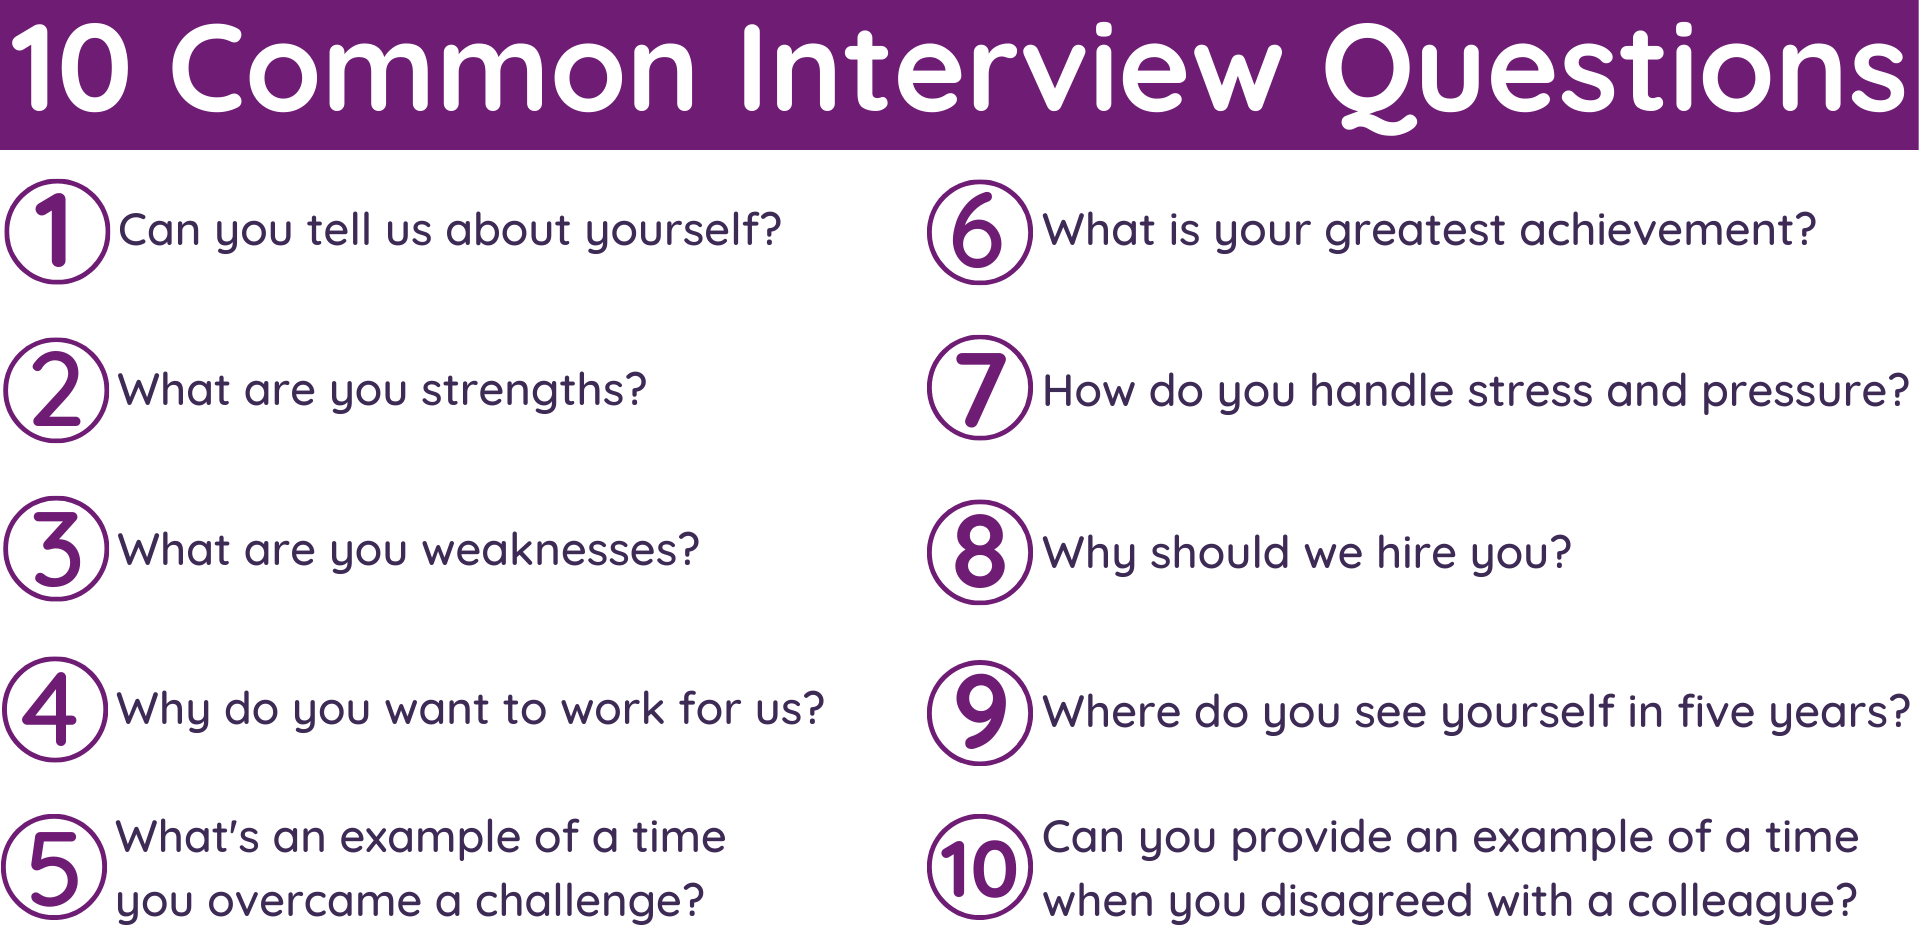 10 Common Interview Questions And How To Answer Them CXK